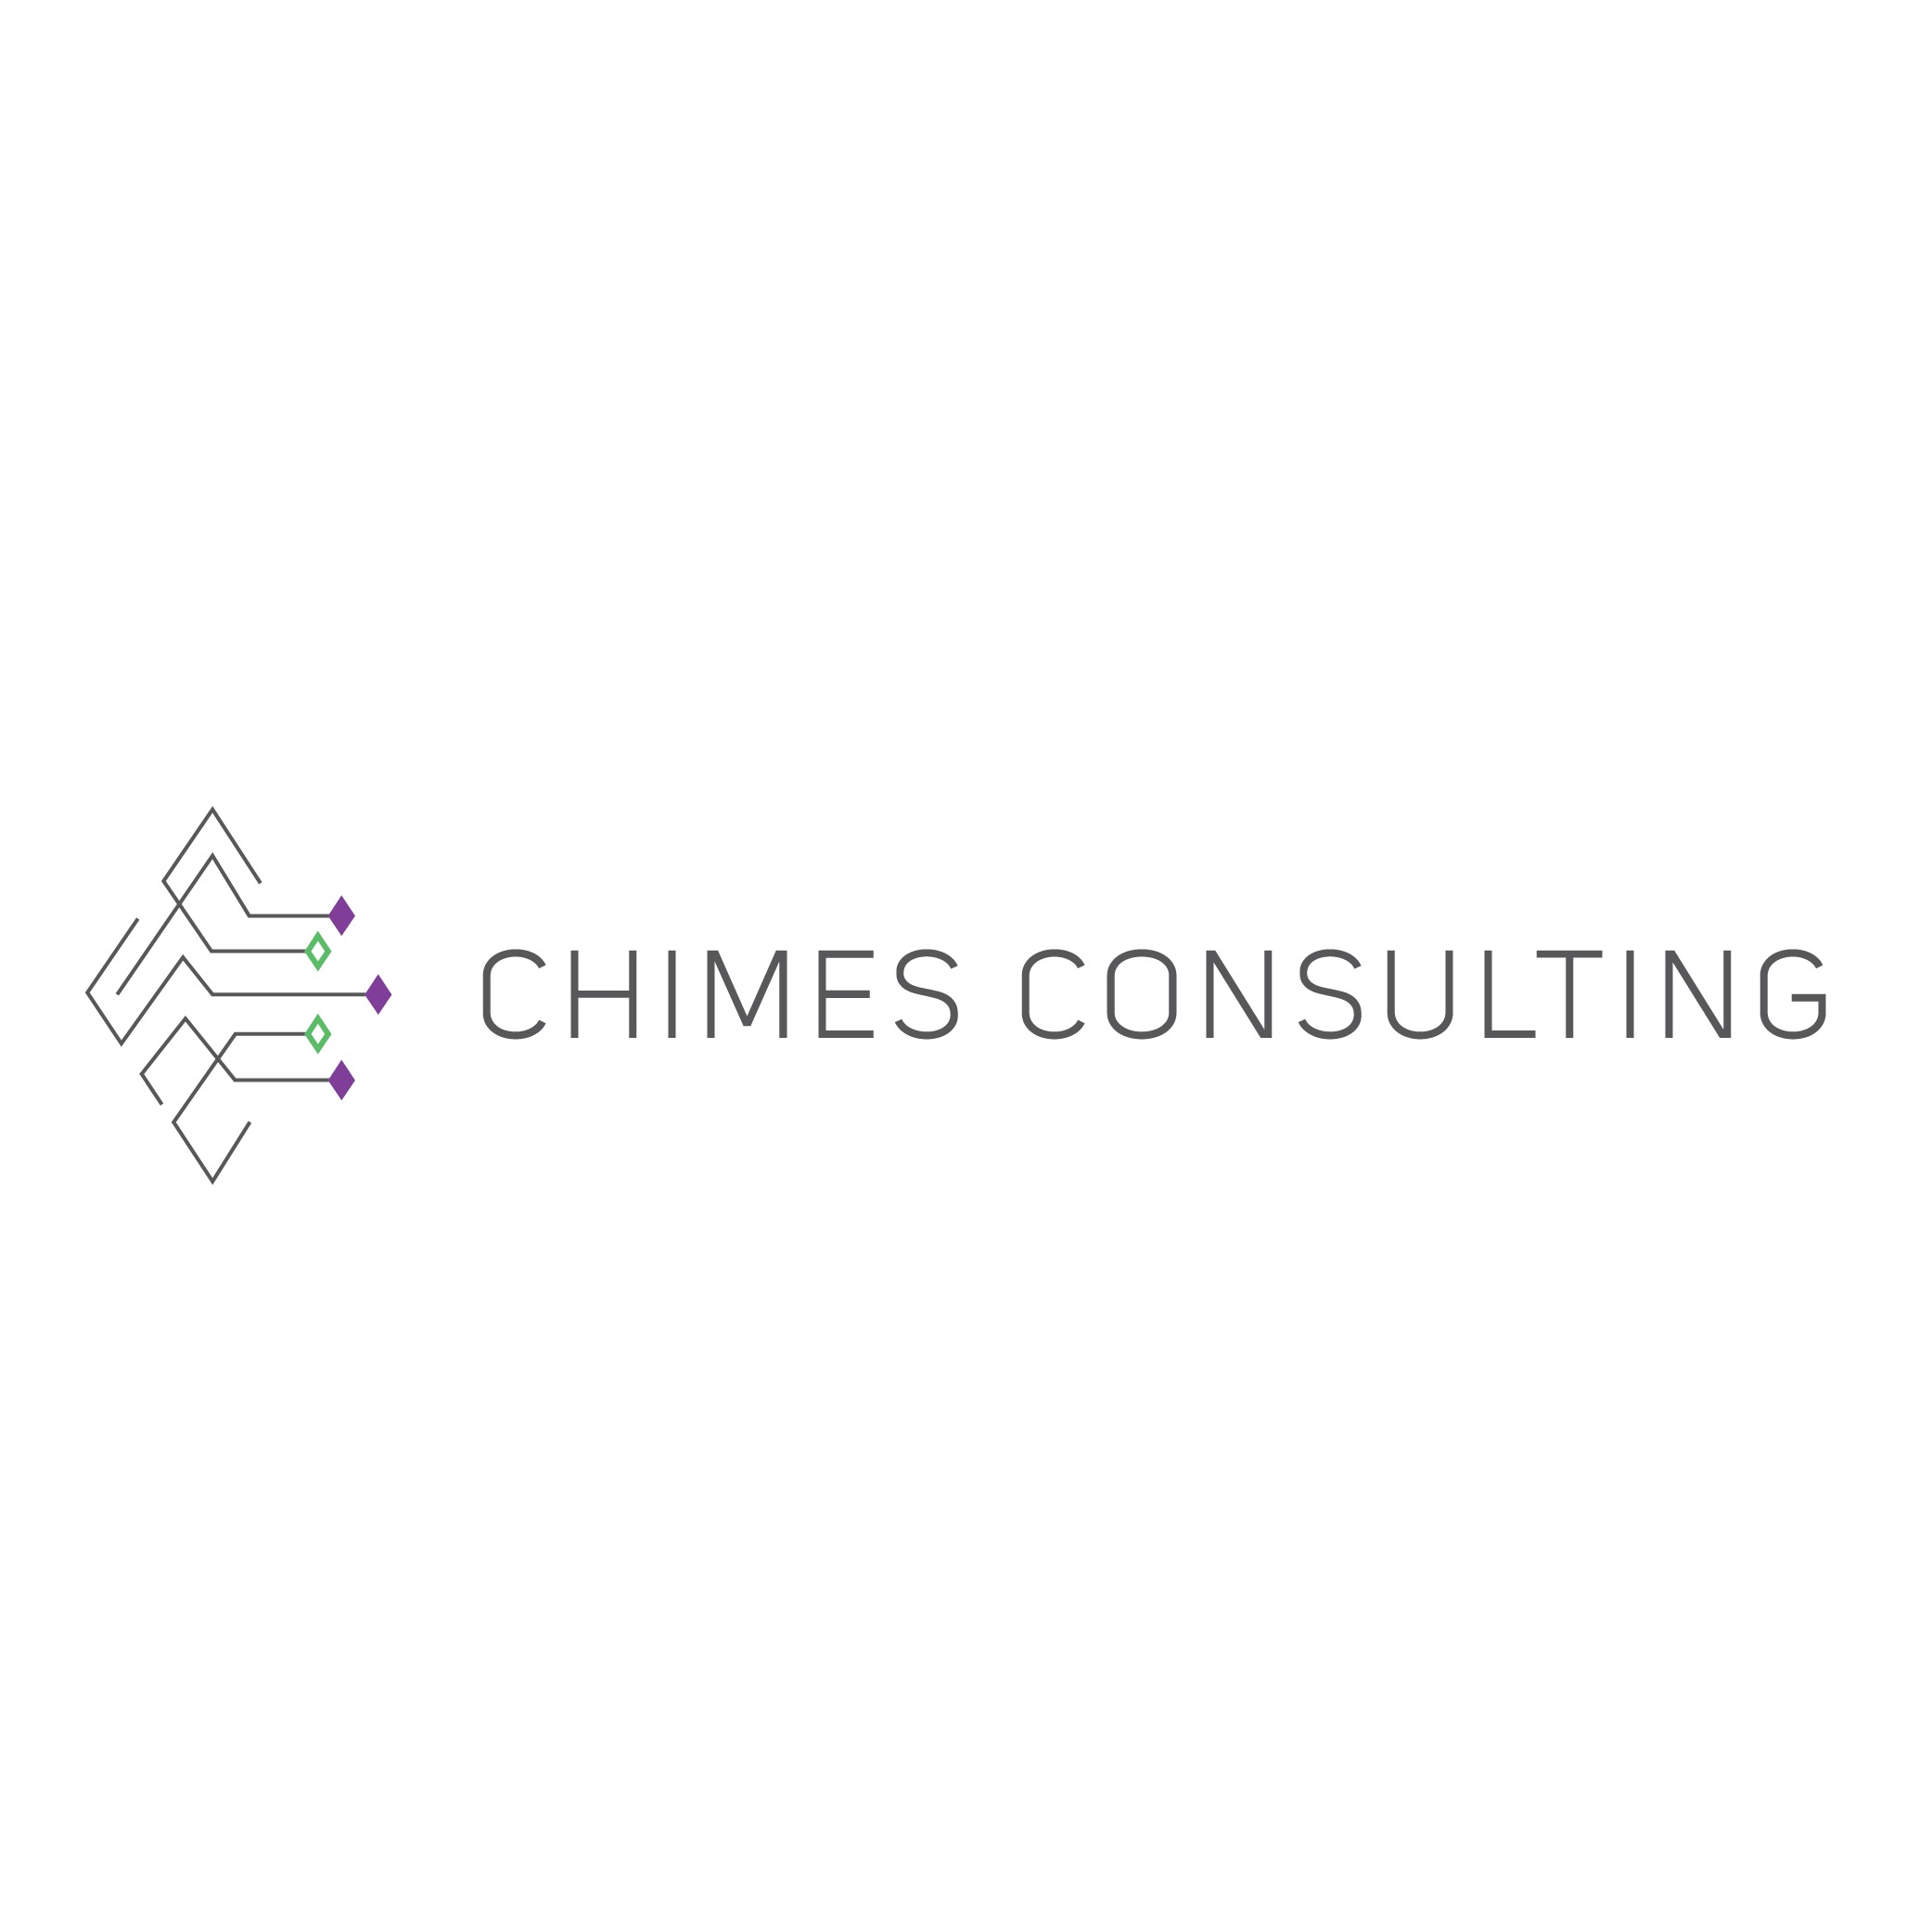 Chimes Consulting